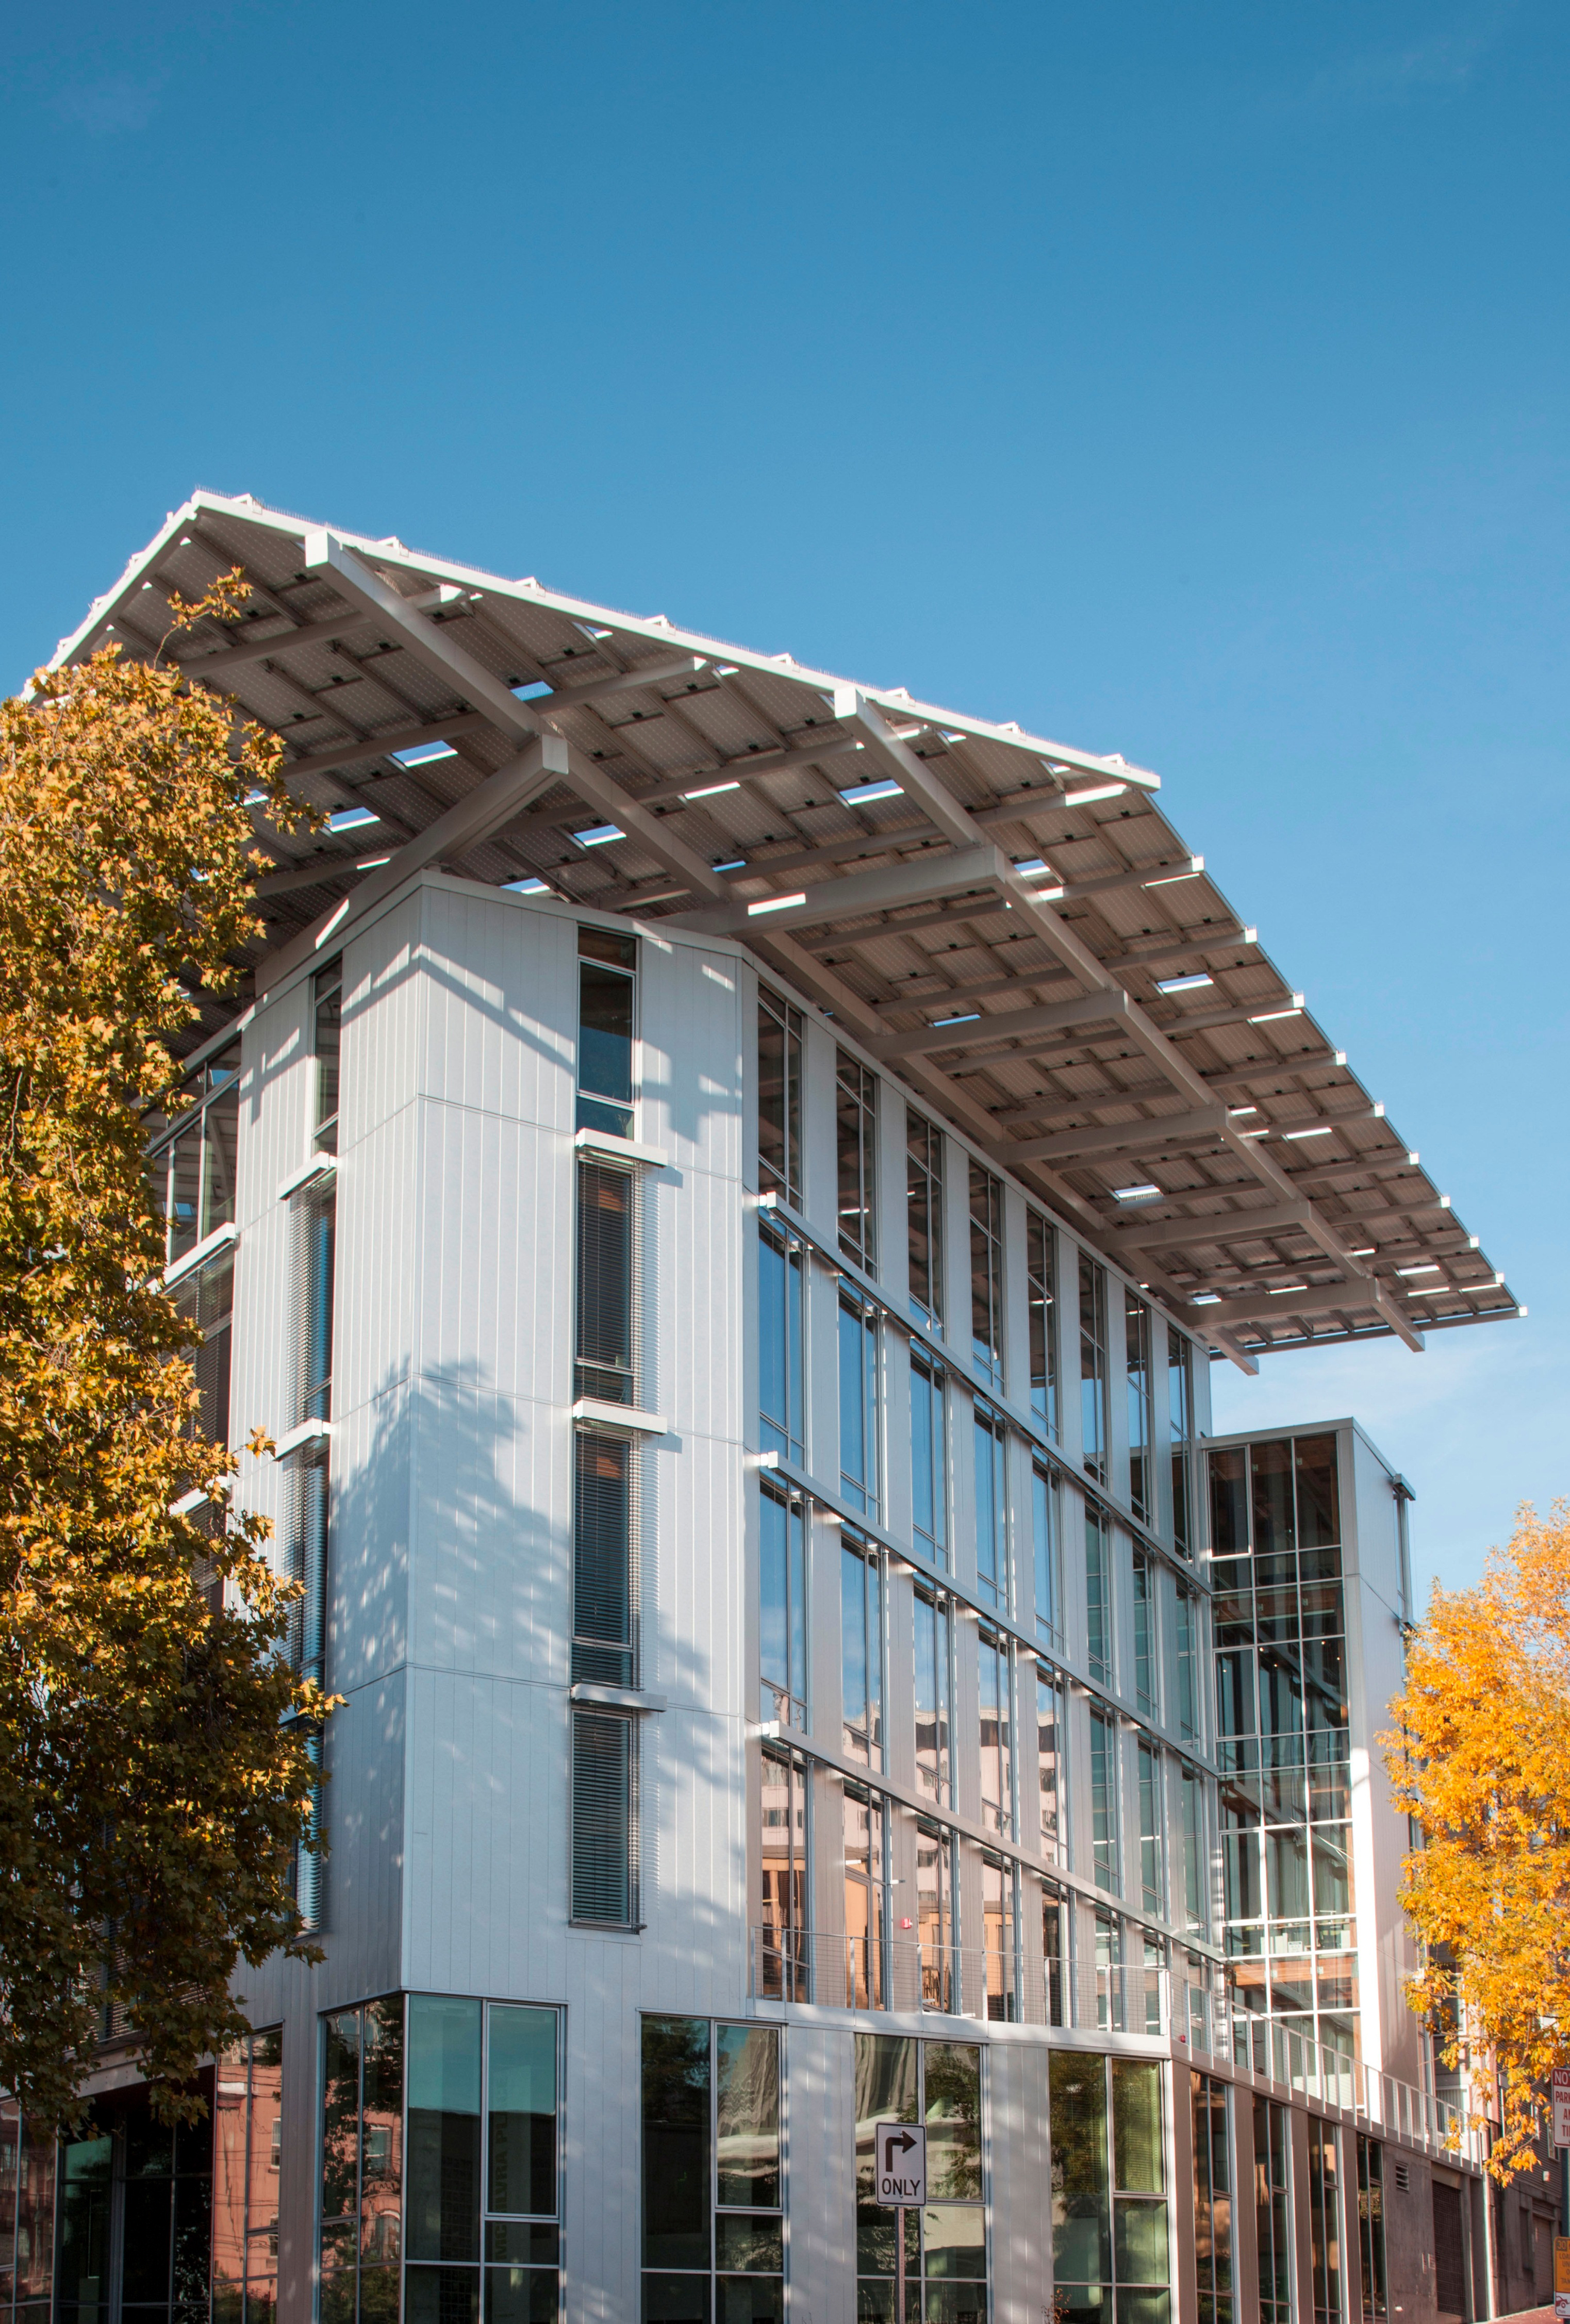 The Bullitt Center in Seattle, WA, which features Solarban 60 glass and Starphire glass, was designed to meet the rigorous standards of the Living Building Challenge. Photo by Tom Kessler Photography.